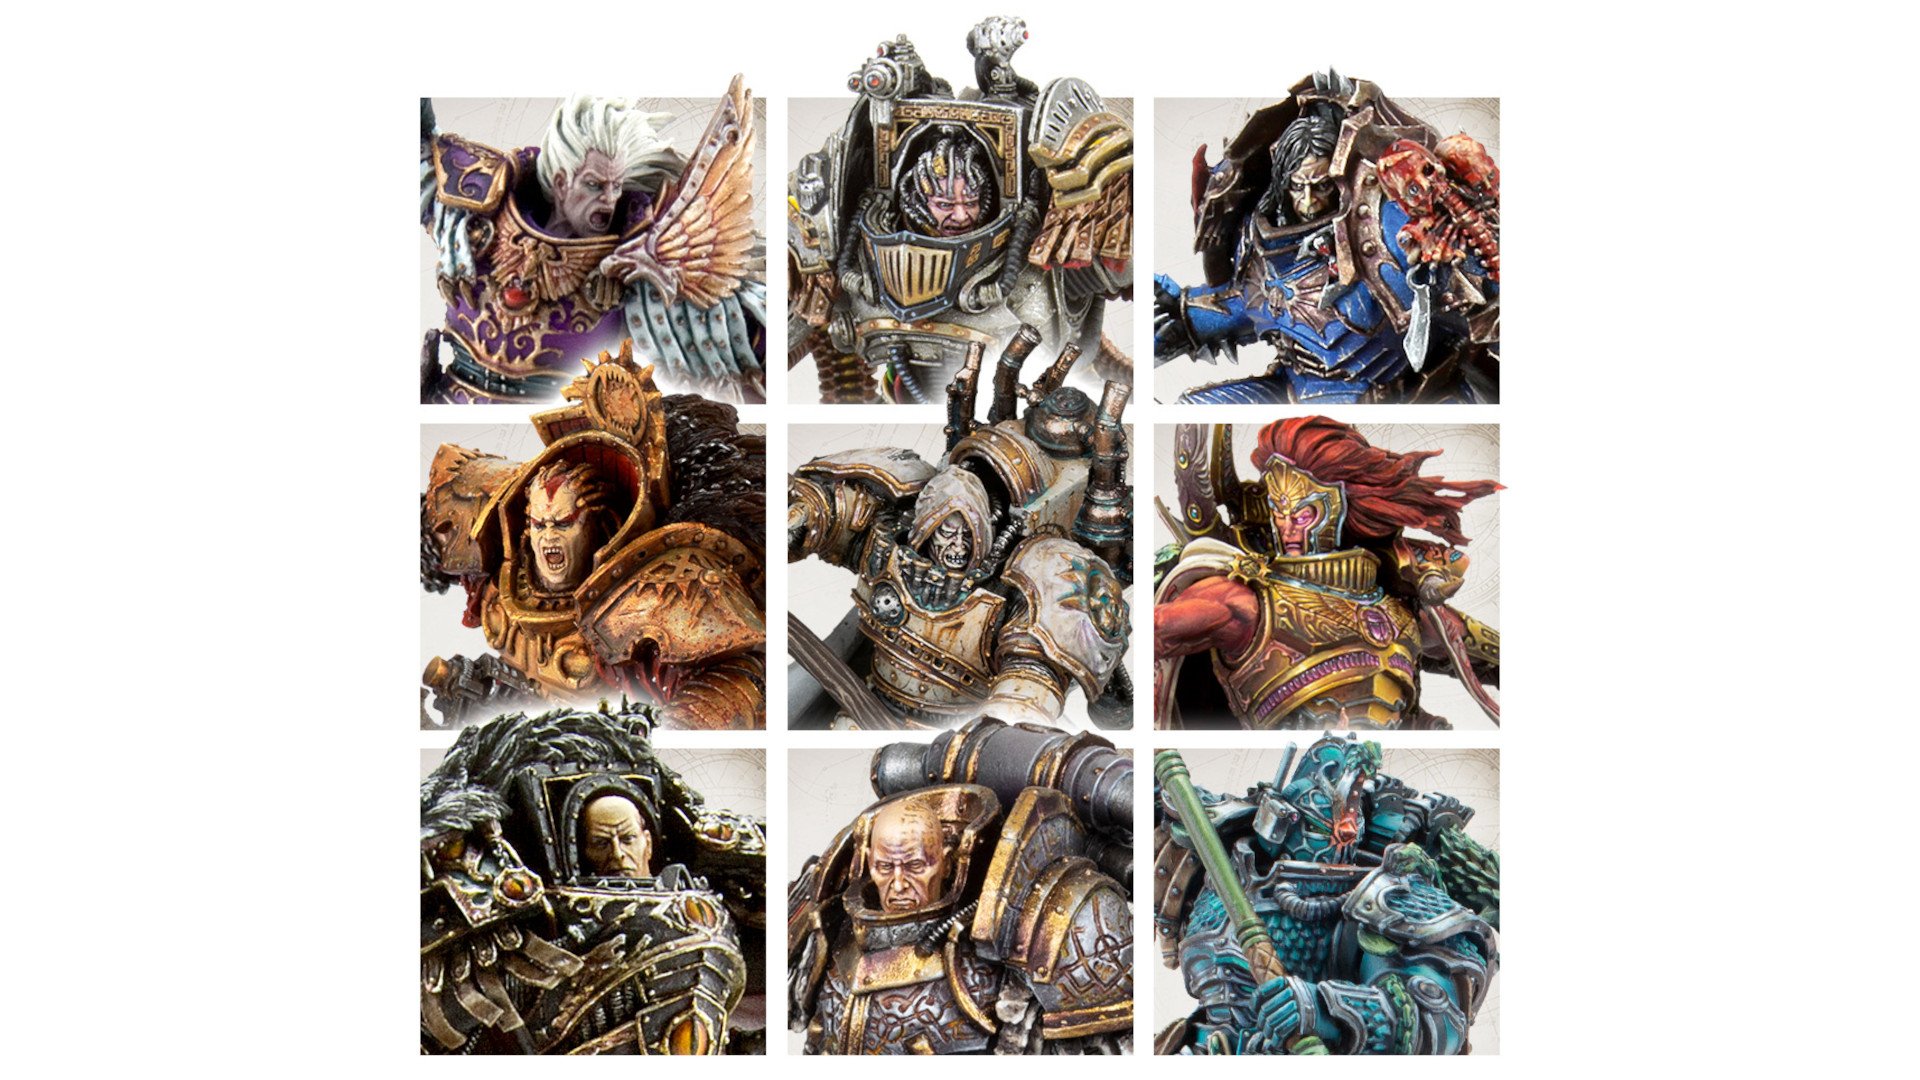 Warhammer 40k primarchs guide - Games Workshop image showing profiles of the nine traitor primarch models made in Forge World Resin